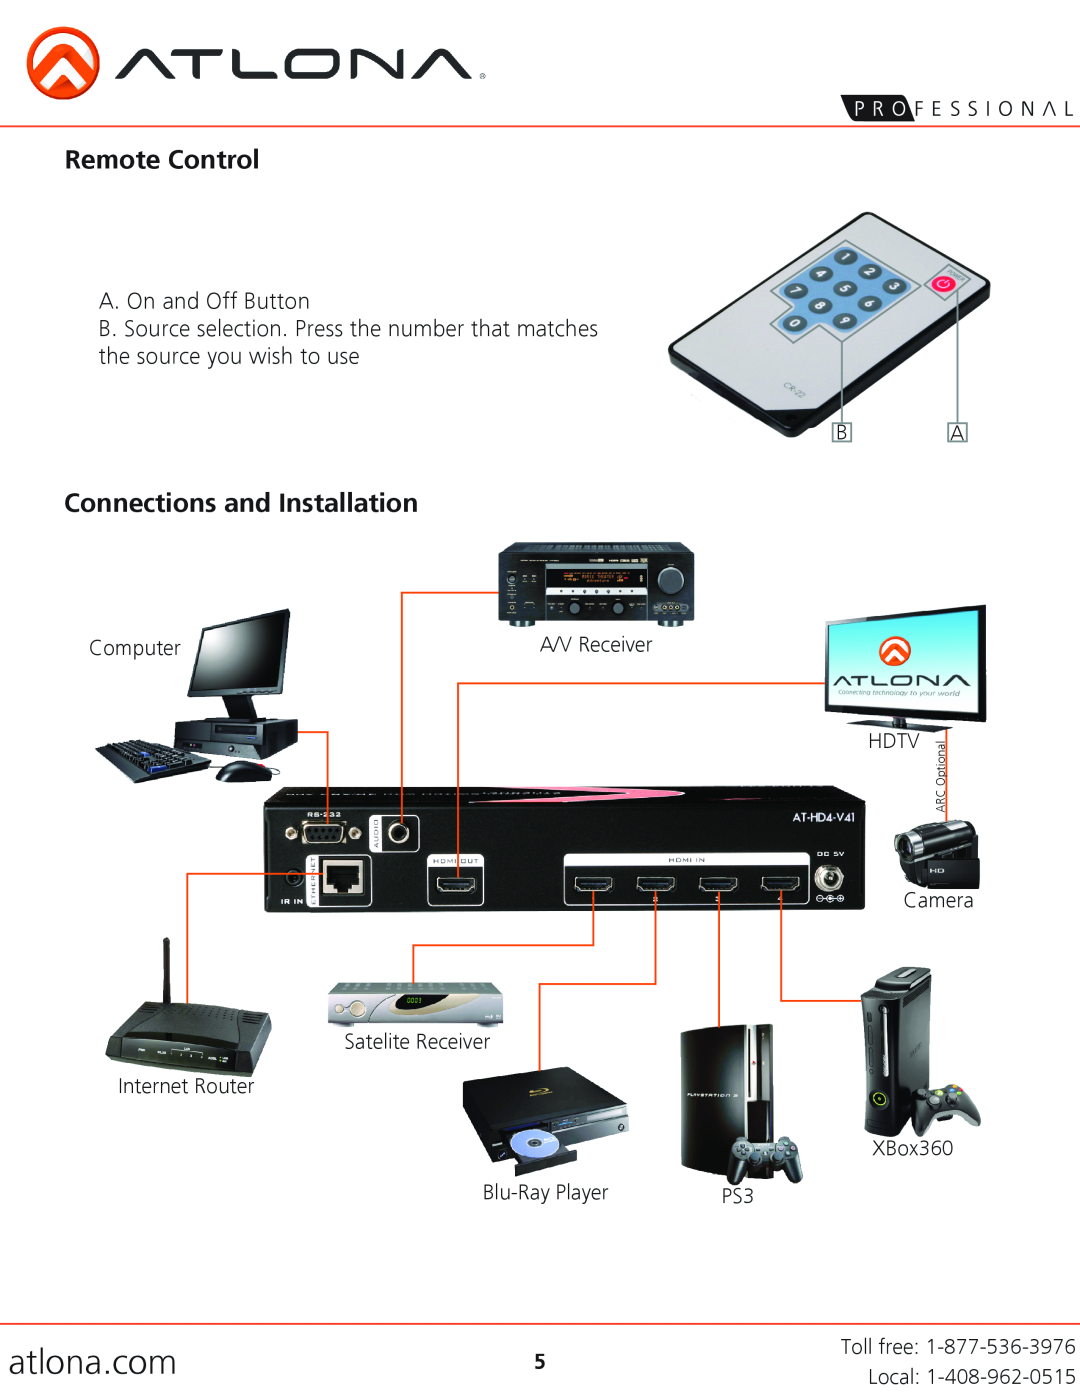 Atlona AT-HD4-V41 user manual Remote Control, Connections and Installation, atlona.com, Local, ARC Optional 